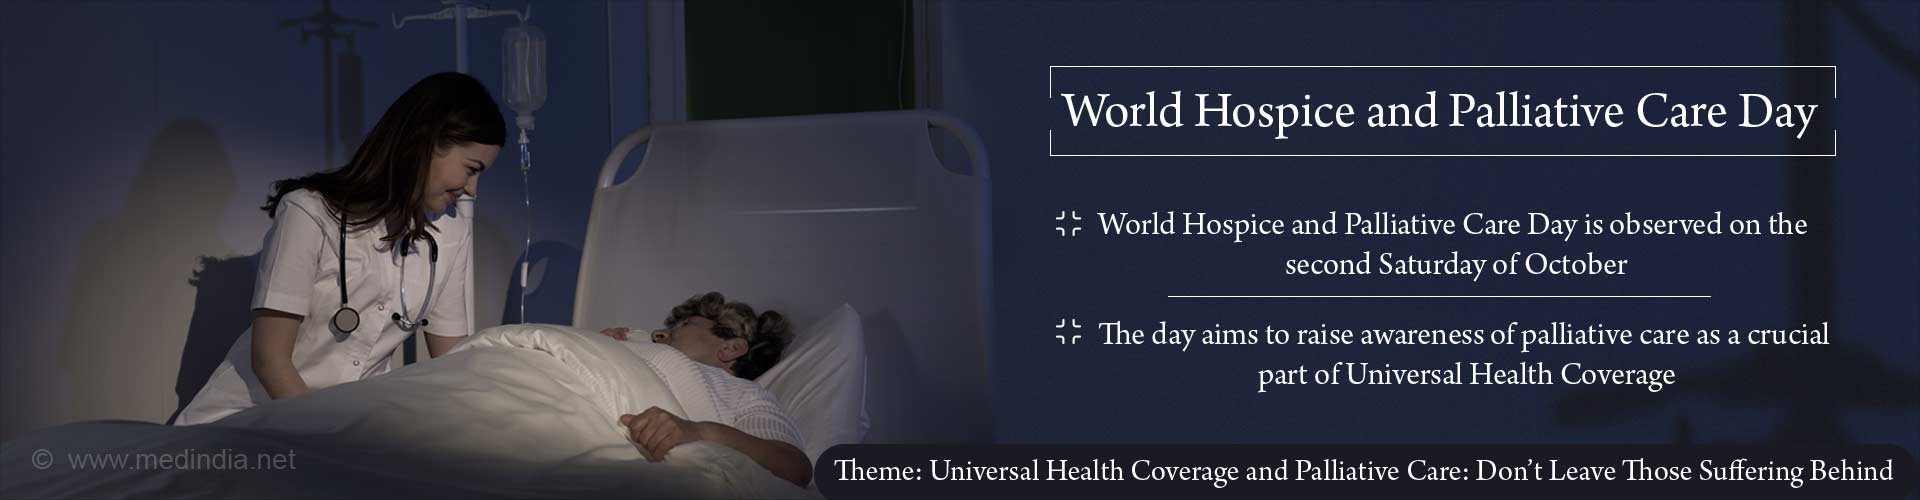 World Hospice and Palliative Care Day
- World Hospice and Palliative Care Day is observed on the second Saturday of October
- The day aims to raise awareness of palliative care as a crucial part of Universal health coverage
Theme: Universal health coverage and palliative care: Don''t leave those suffering behind
